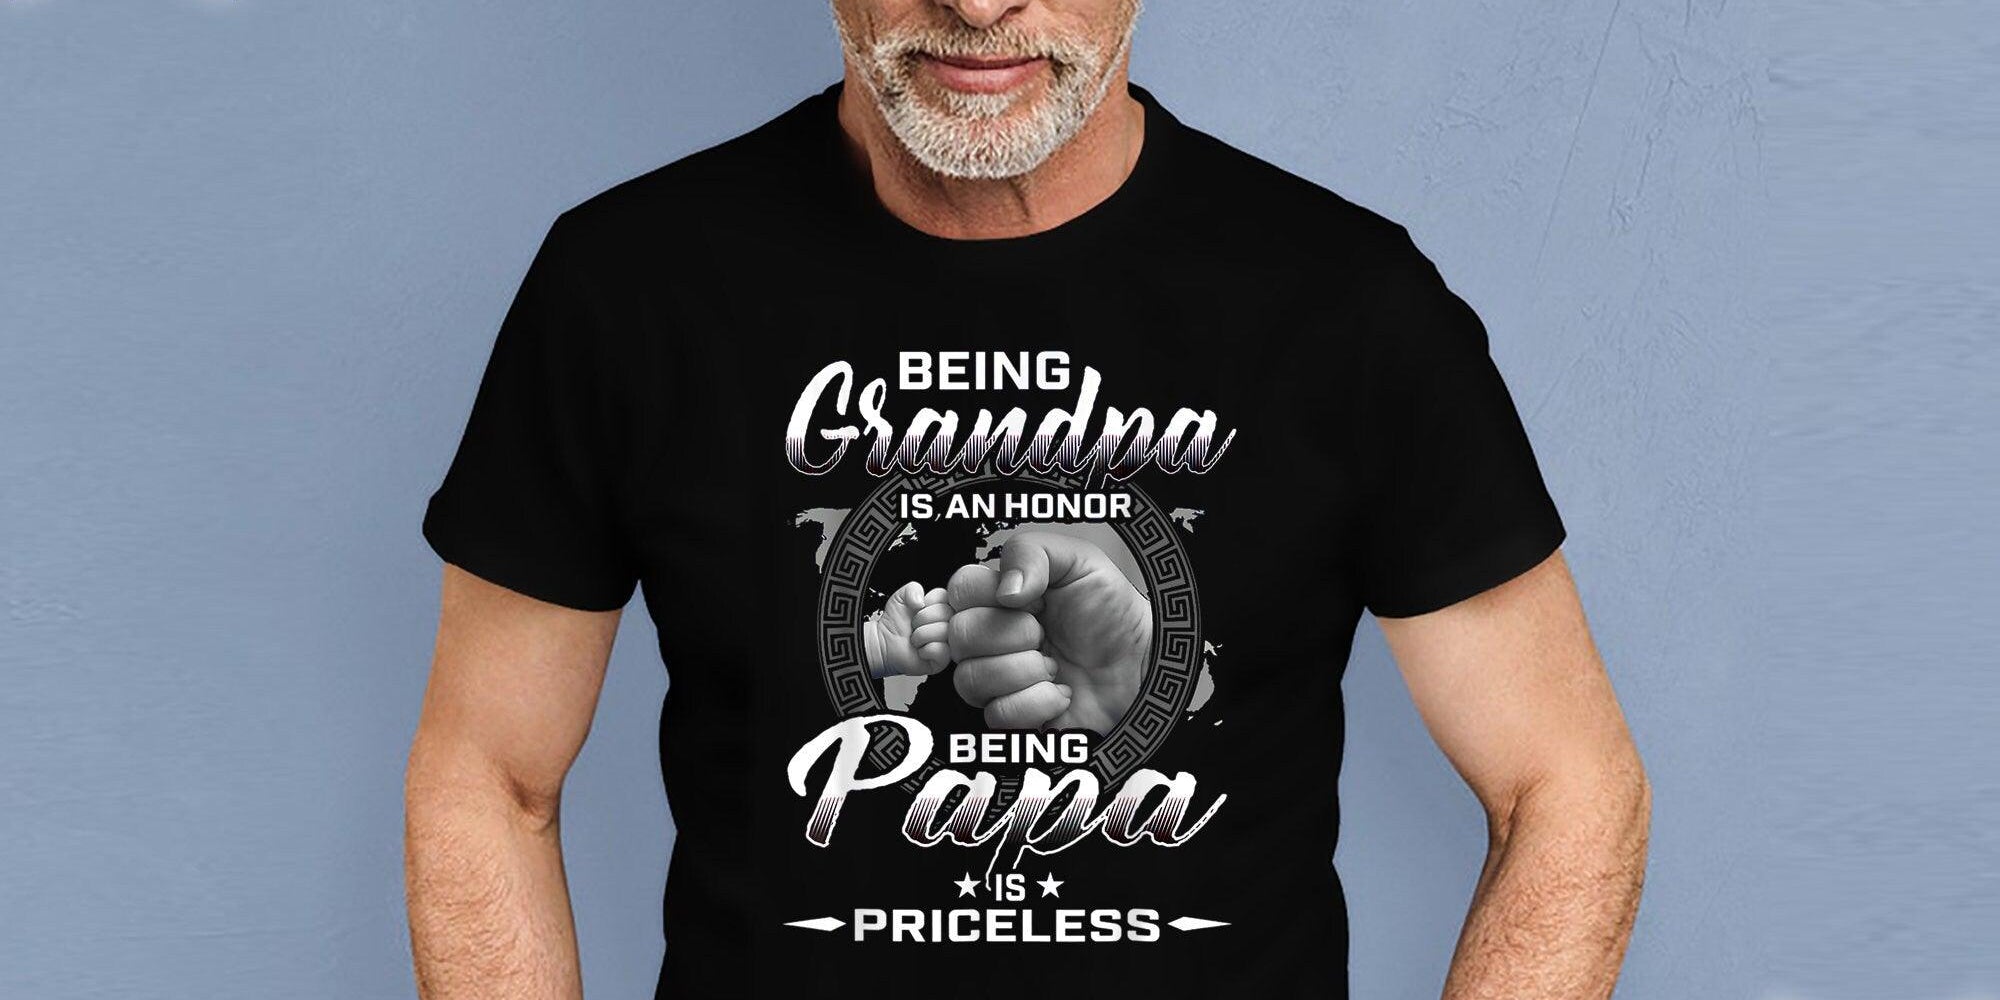 Being Grandpa Is An Honor Being Papa Is Priceless Father T-Shirts, Father&#39;s day gift, Dads T Shirt, Grandpas T-Shirt, Gift For Dad - plusminusco.com